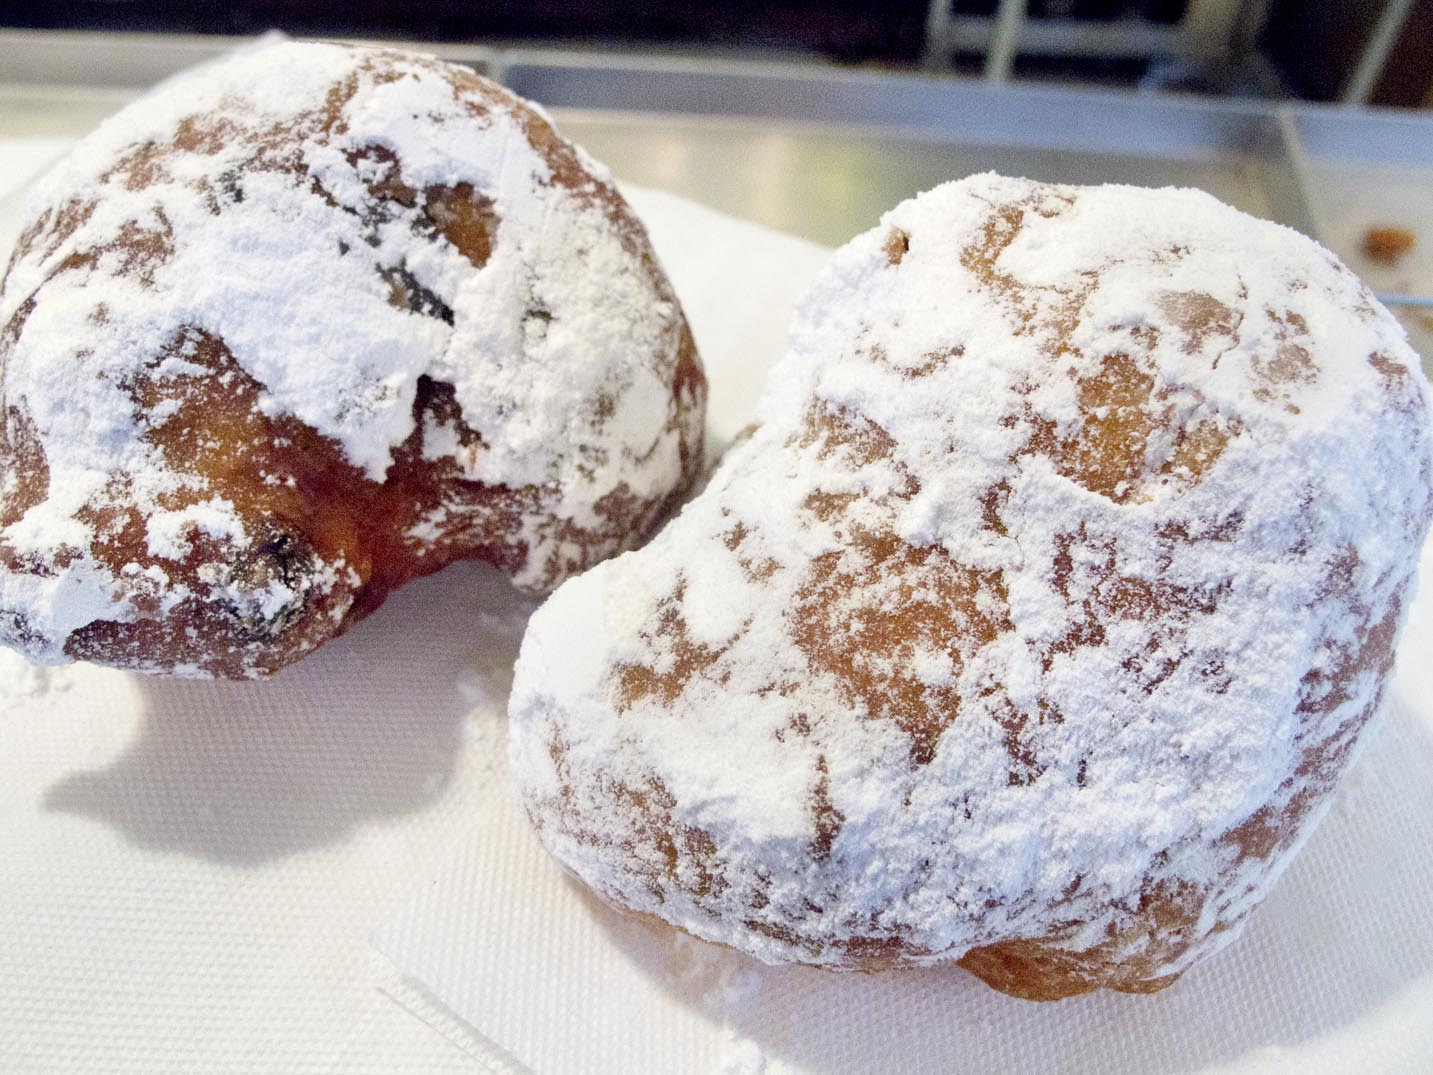 An olliebollen and a krentenbollen purchased on the street in Amsterdam, the Netherlands